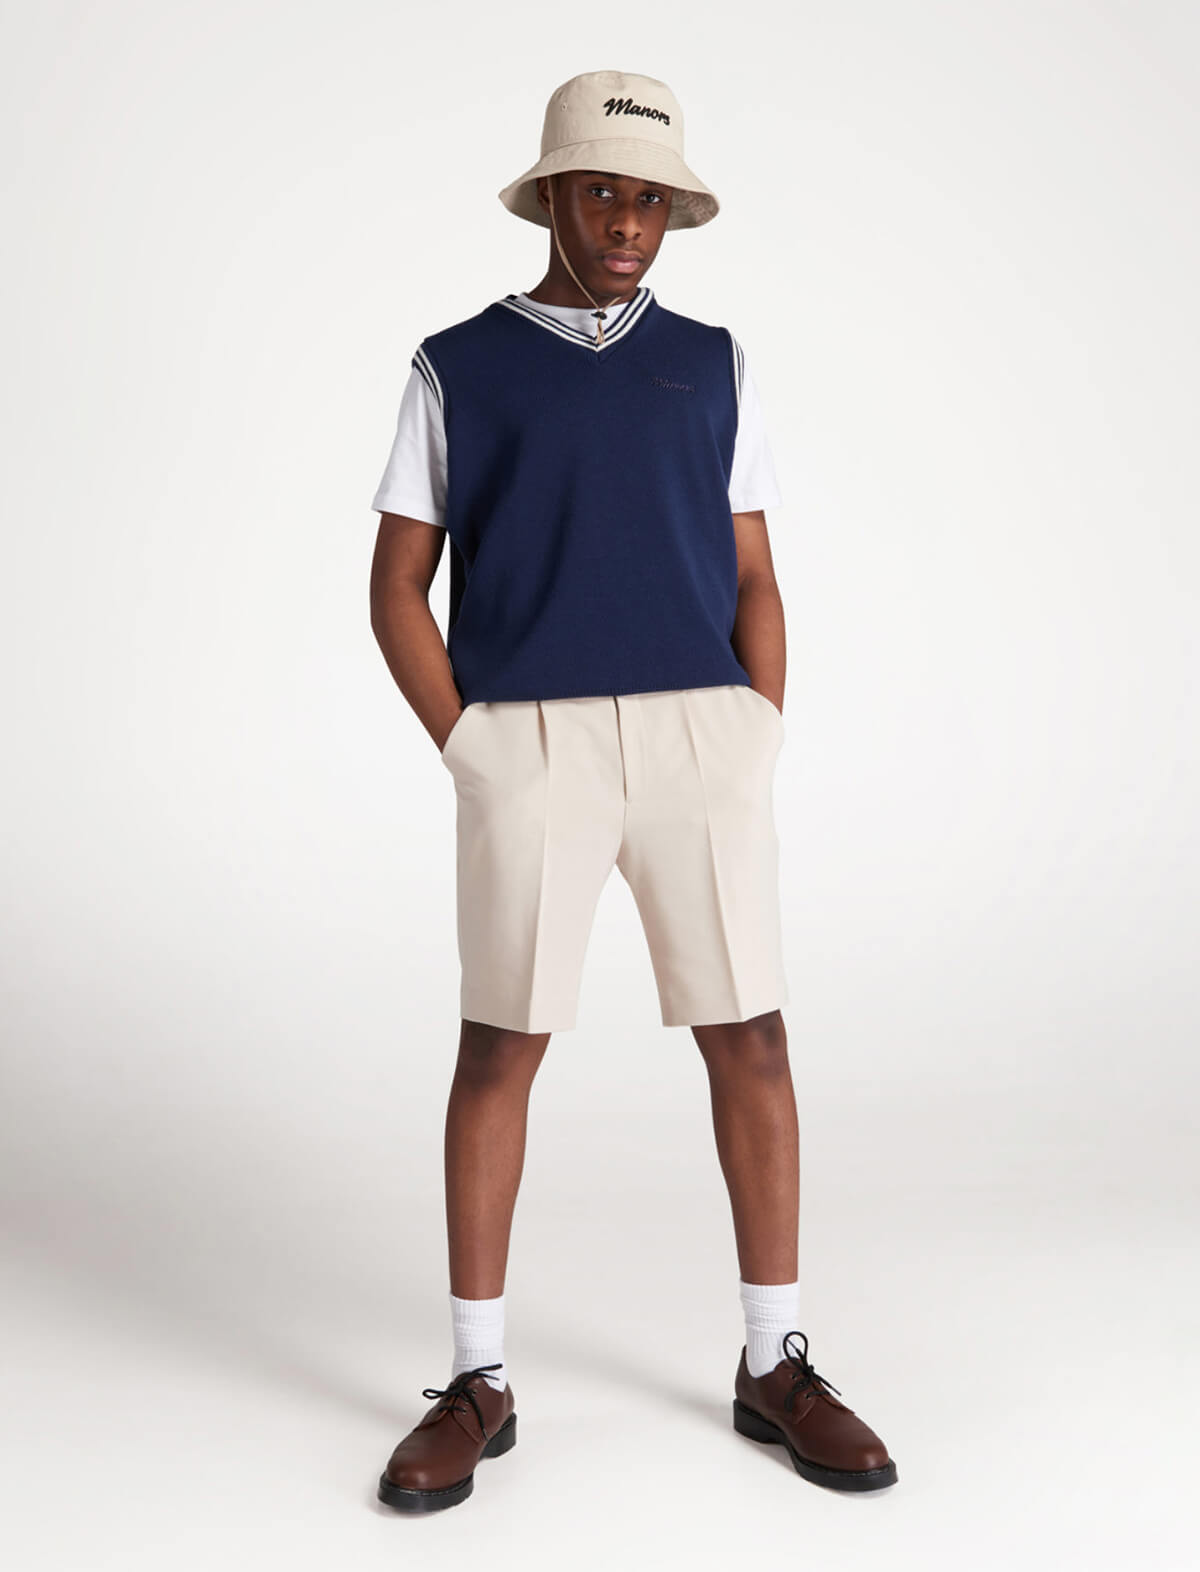 MANORS GOLF Classic Bucket Hat in Natural